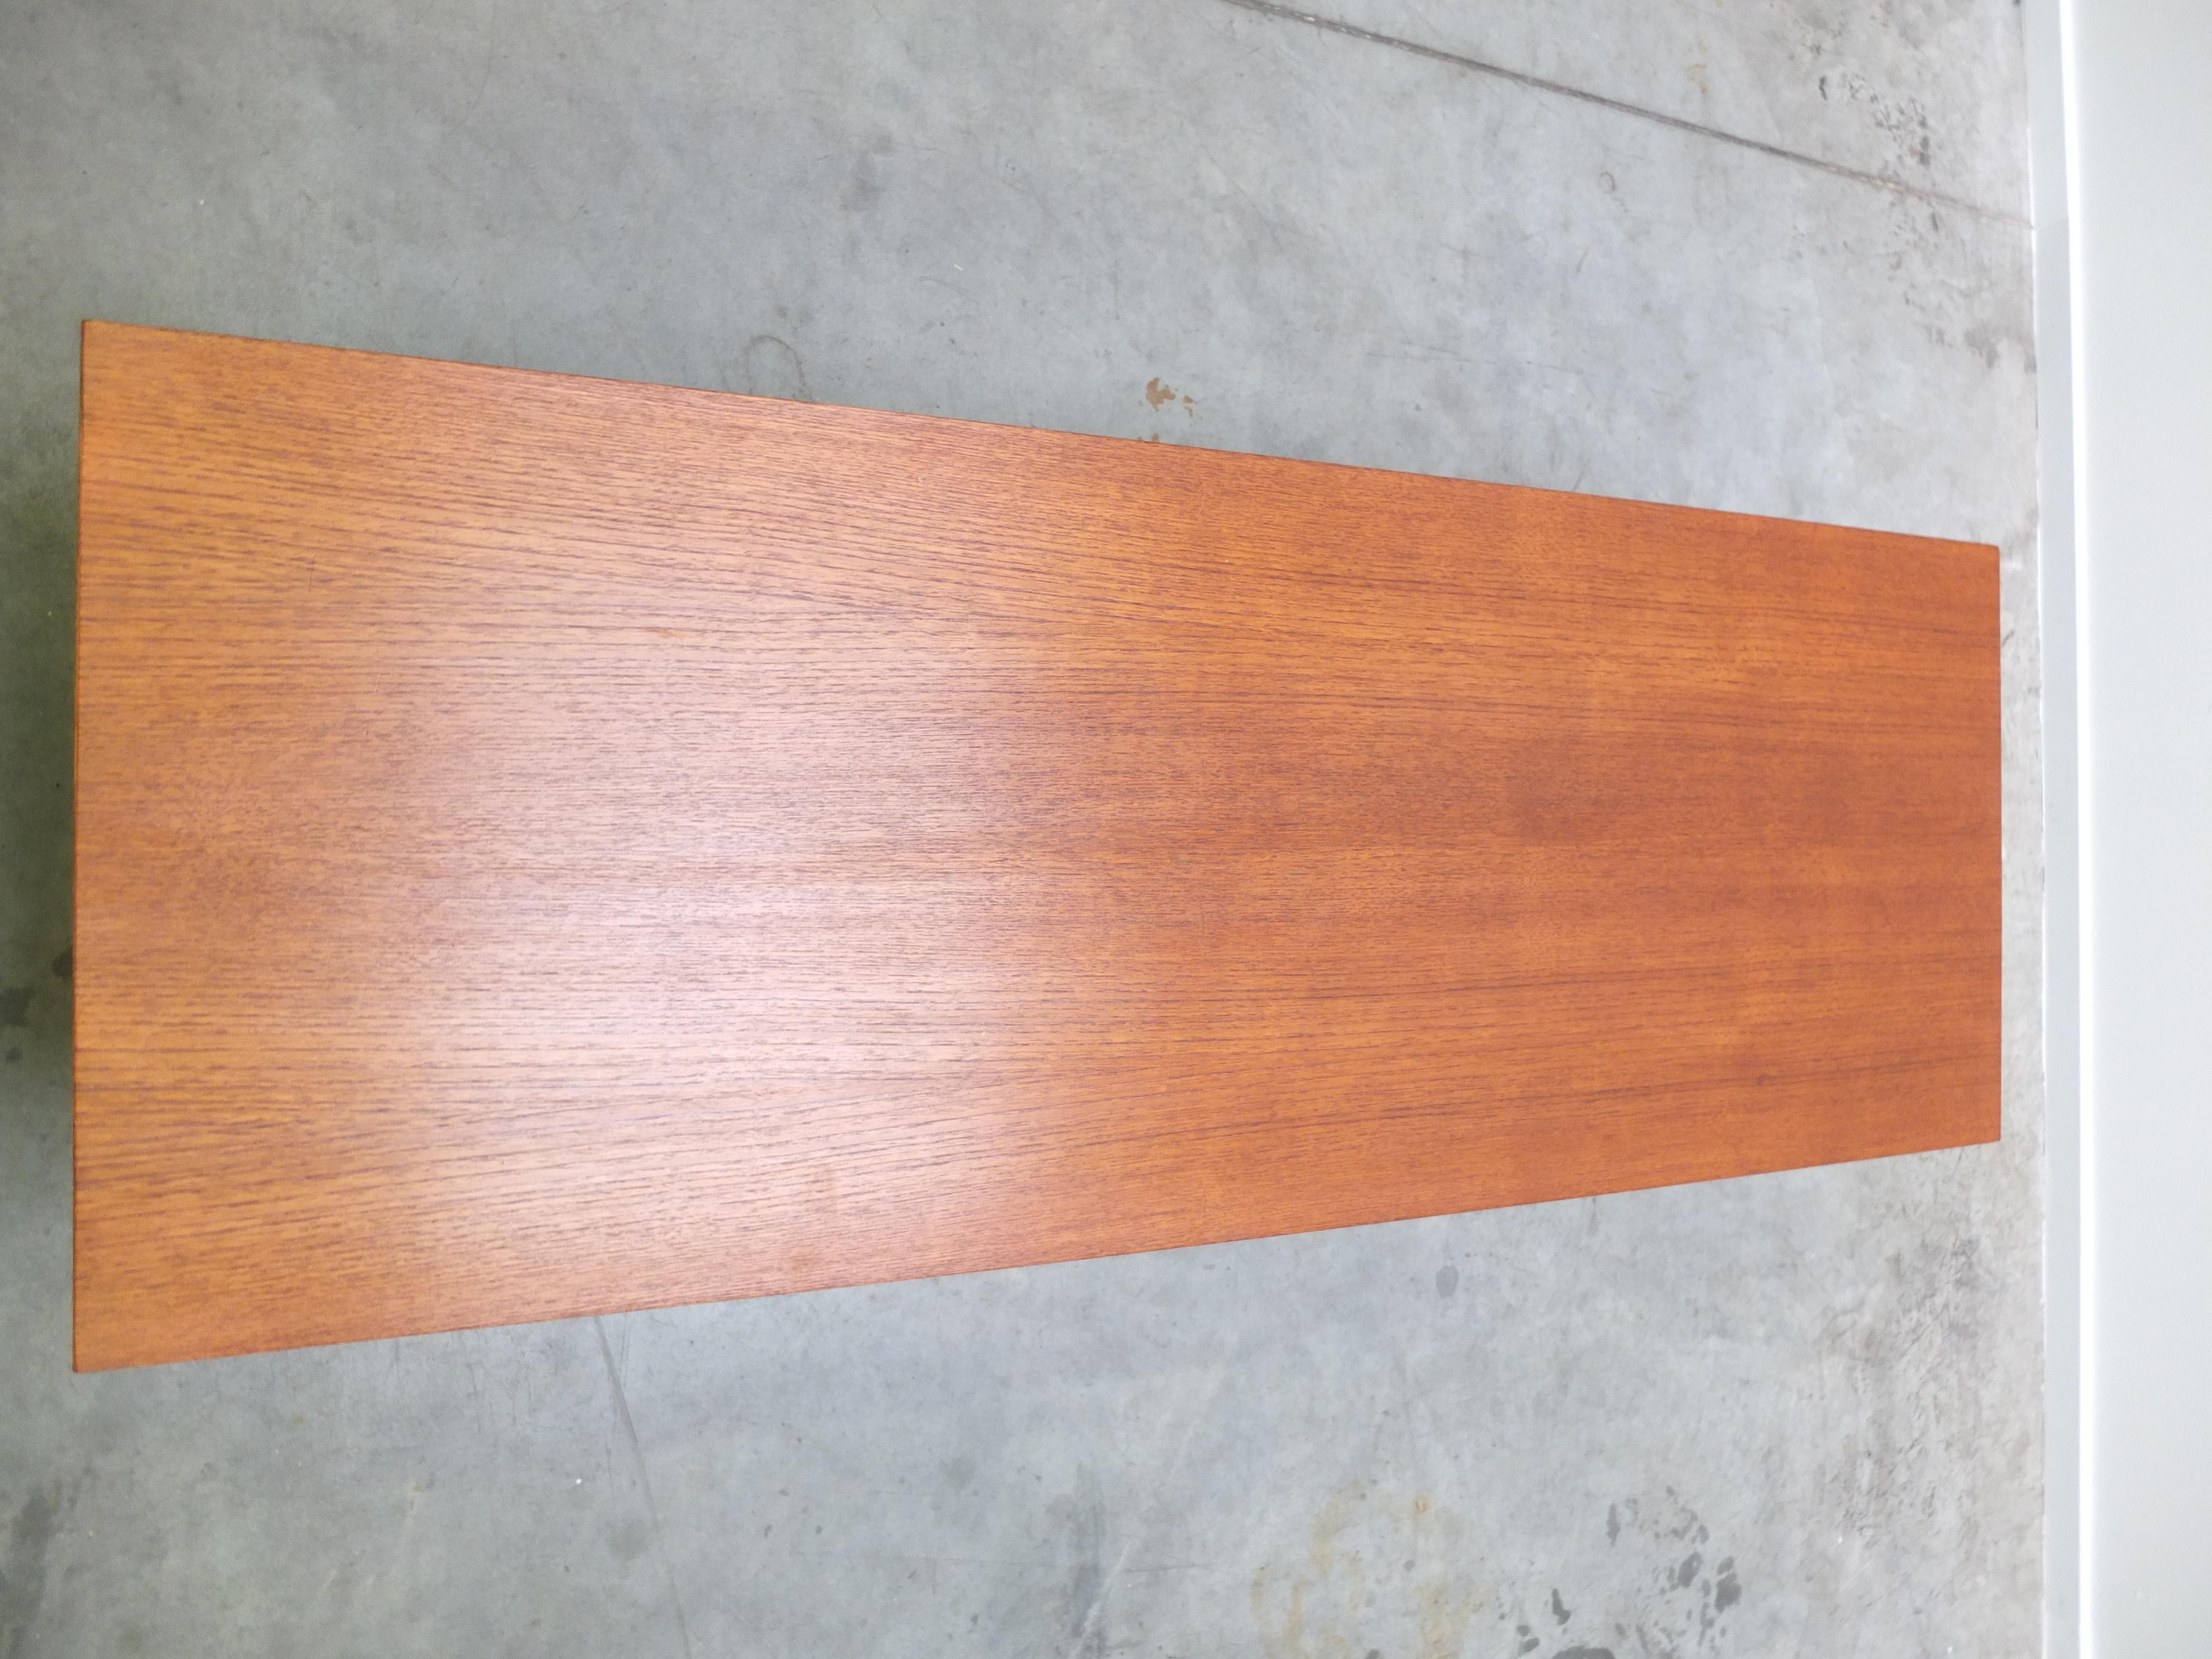 Large Modernist Teak Coffee Table in the Style of Arne Jacobsen, 1960s For Sale 7